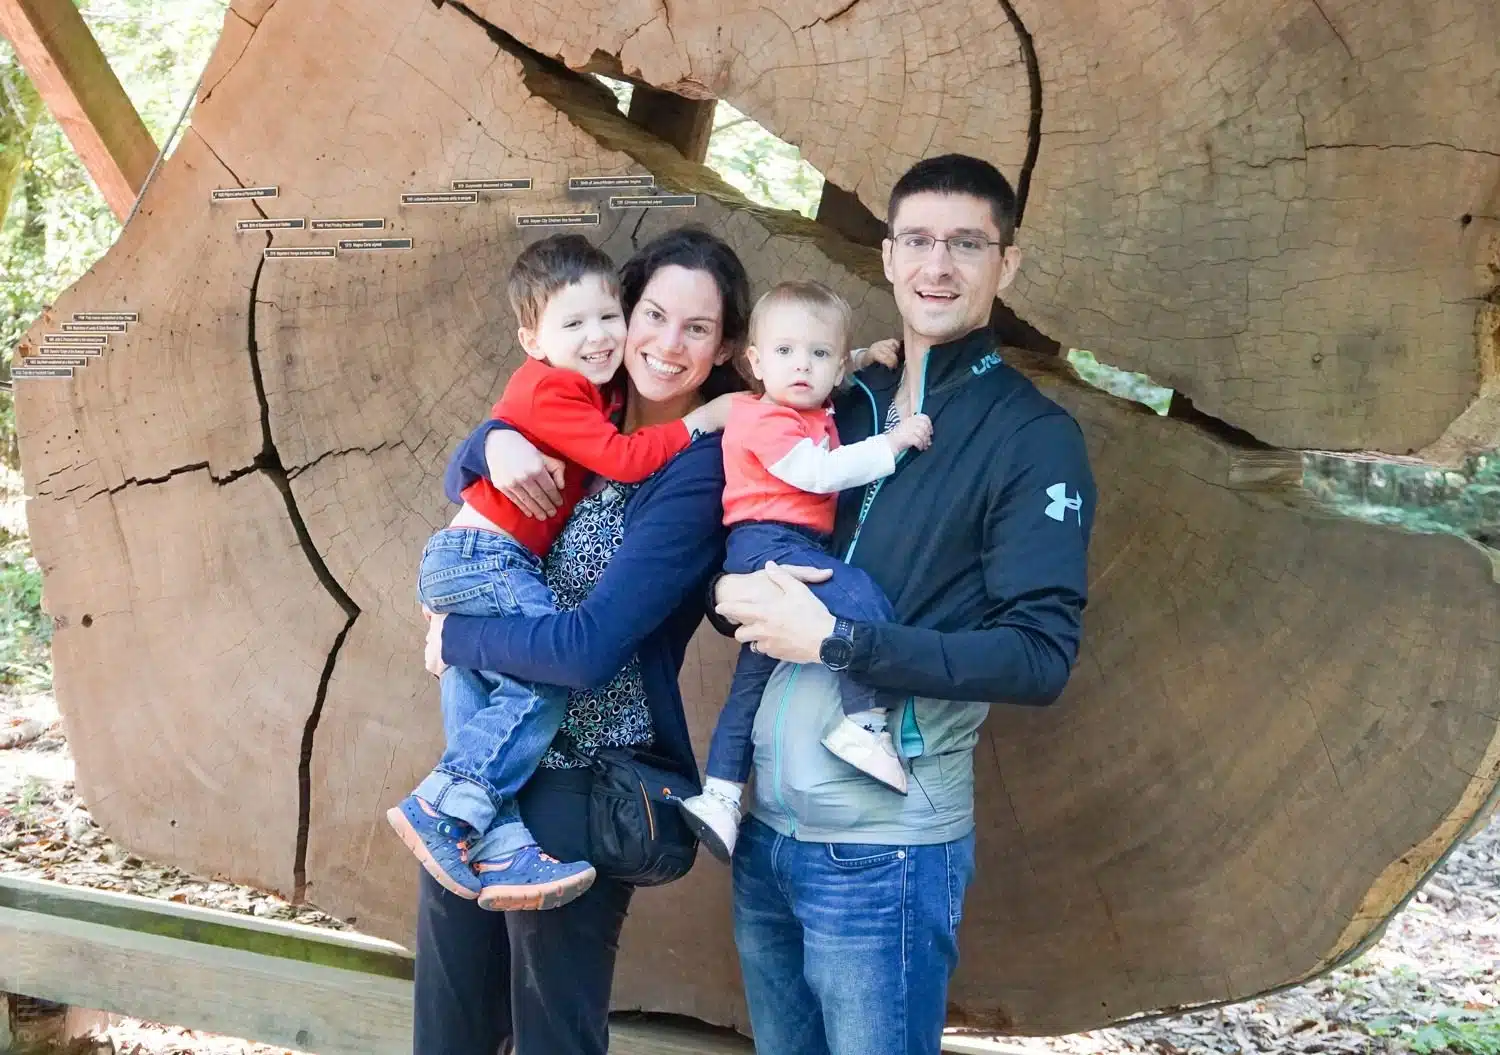 Don't forget to pose near the giant redwood tree slice!